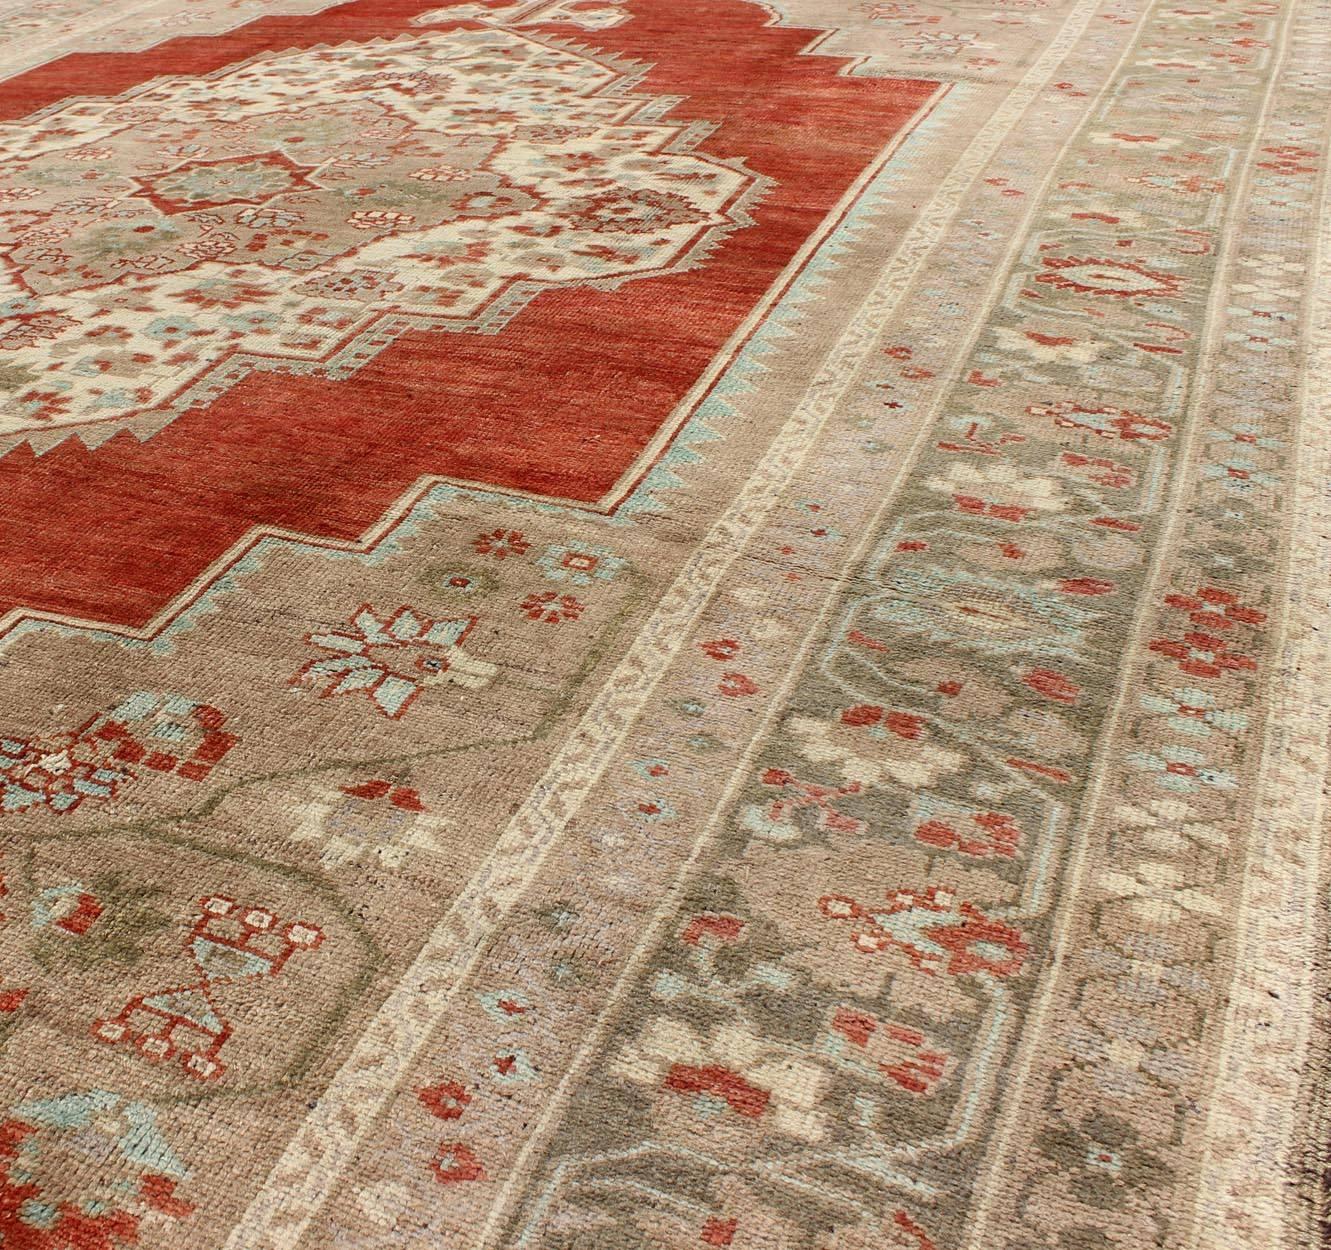 Wool Turkish Oushak Rug in Orange Red, Light Green, Warm Taupe and Cream colors For Sale